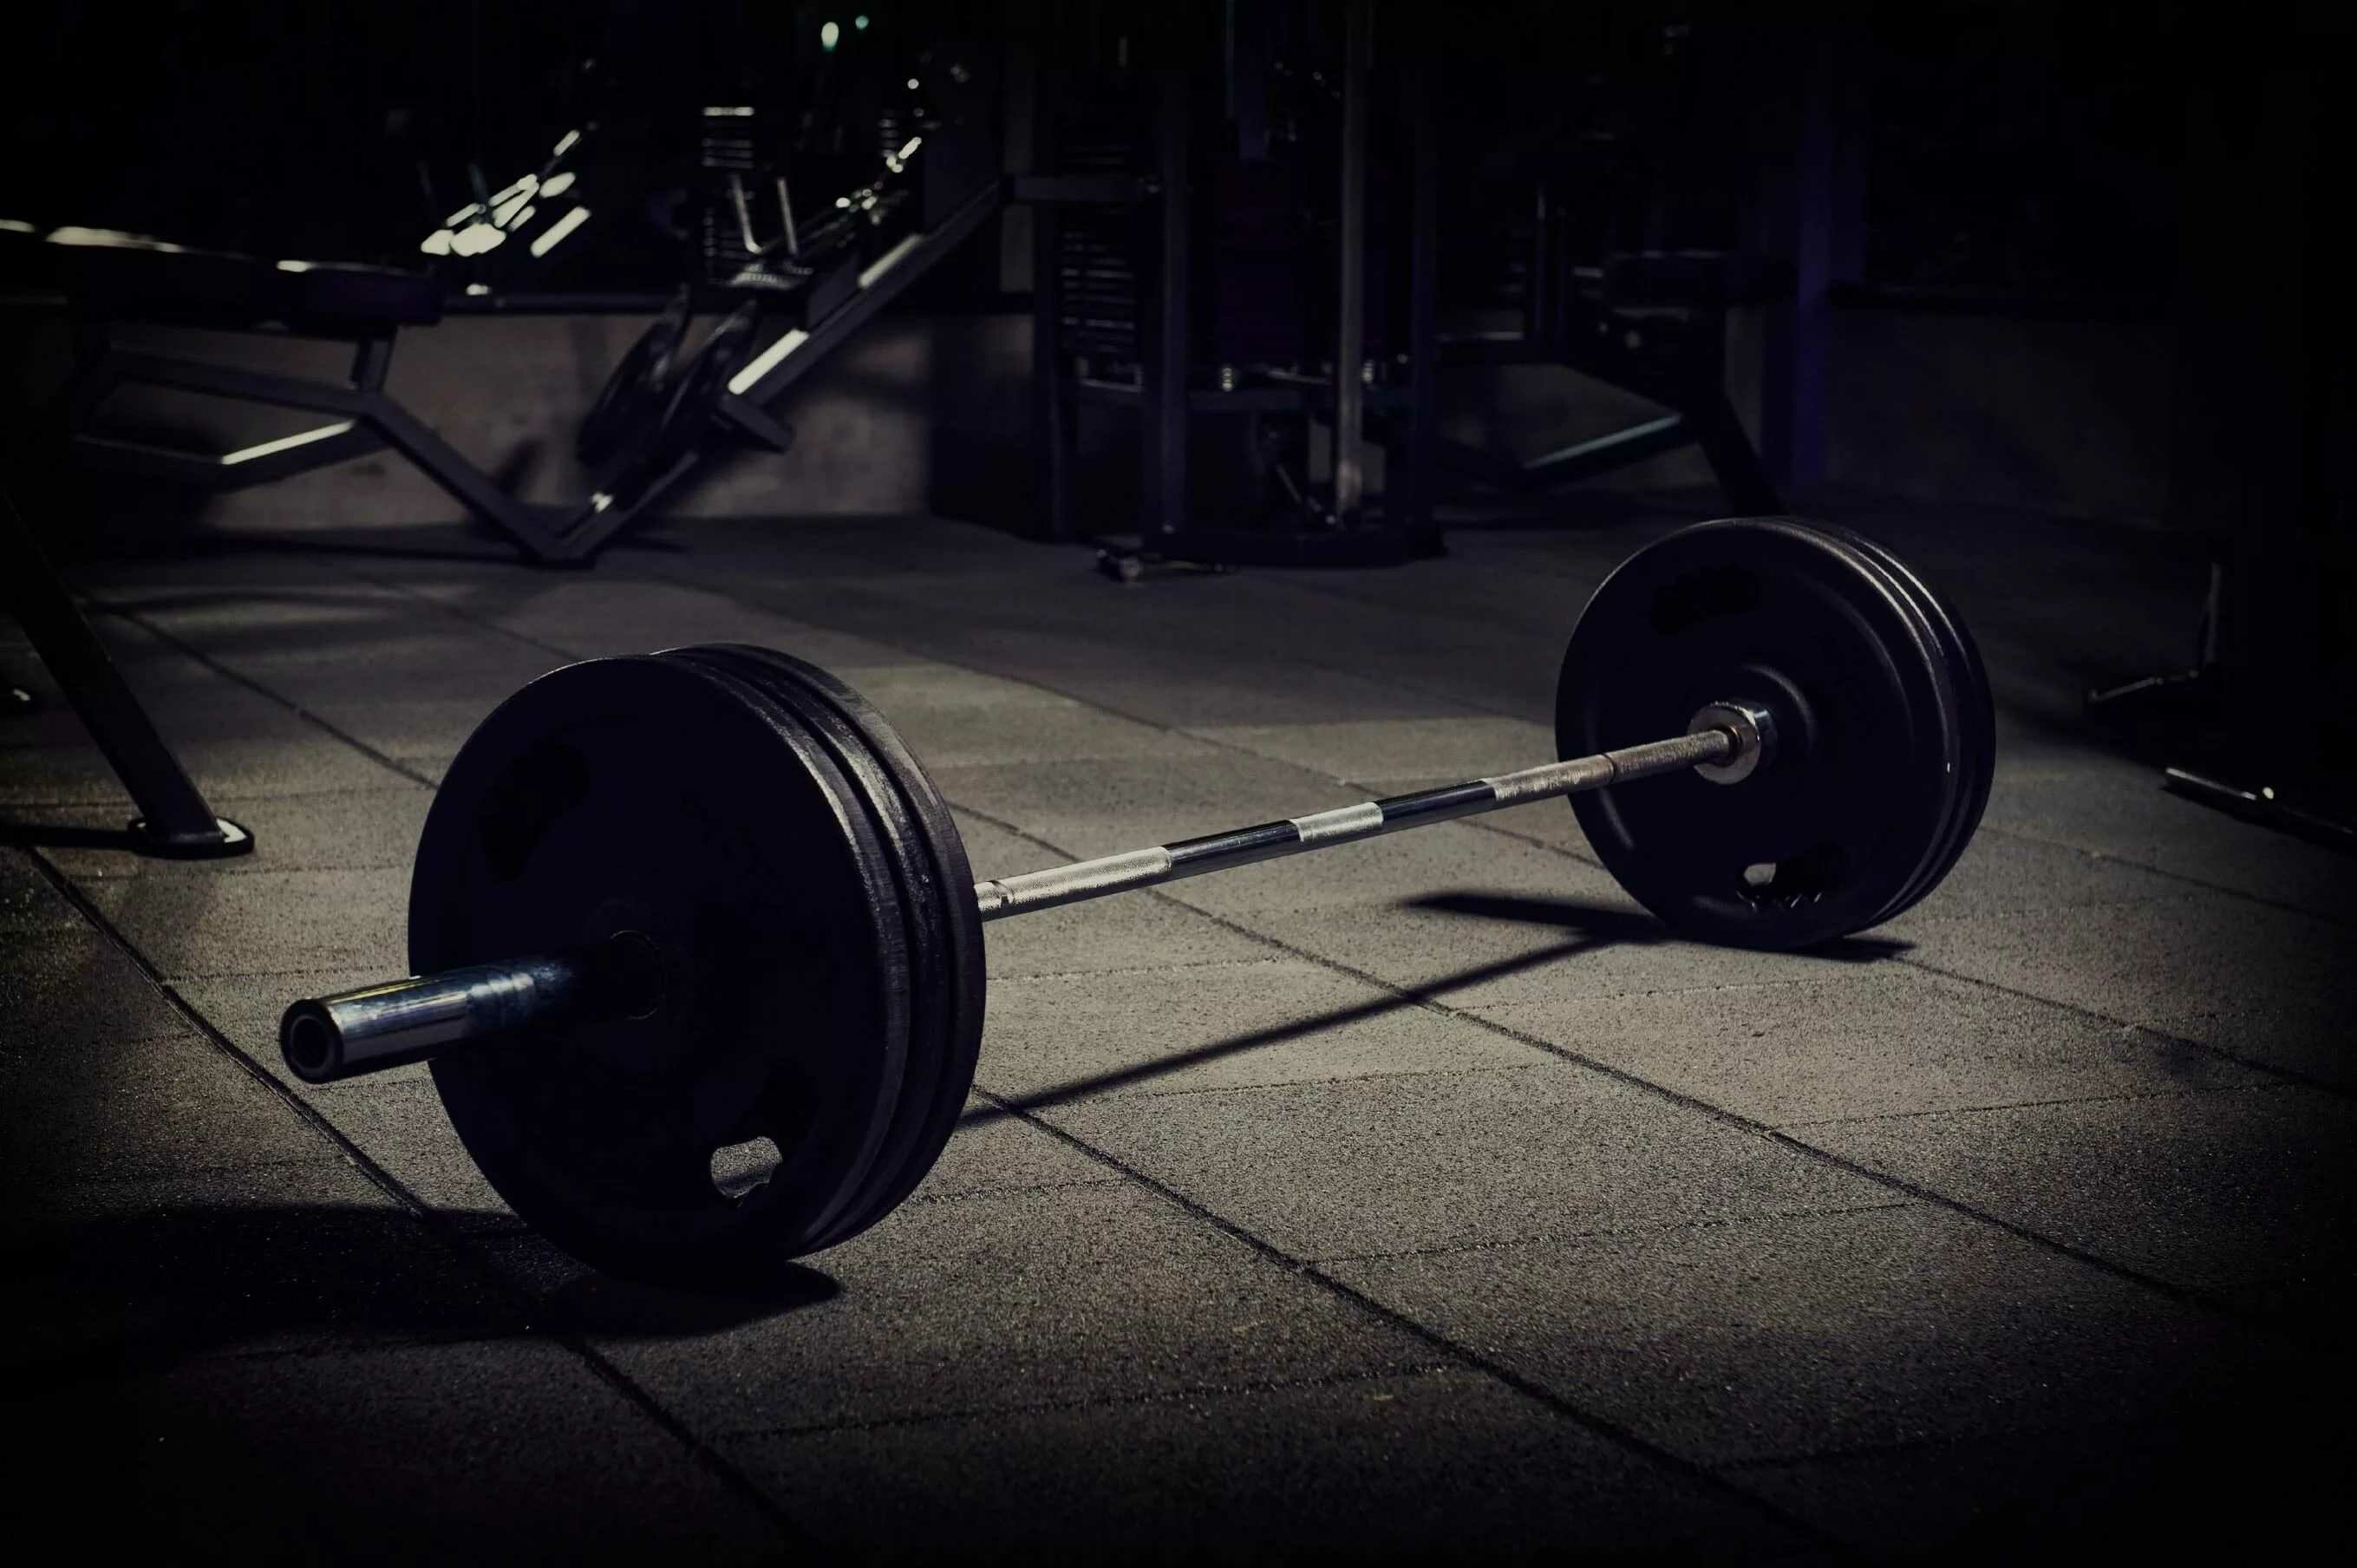 Powerlifting: Barbell, A piece of exercise equipment used in weight training. 2720x1810 HD Wallpaper.